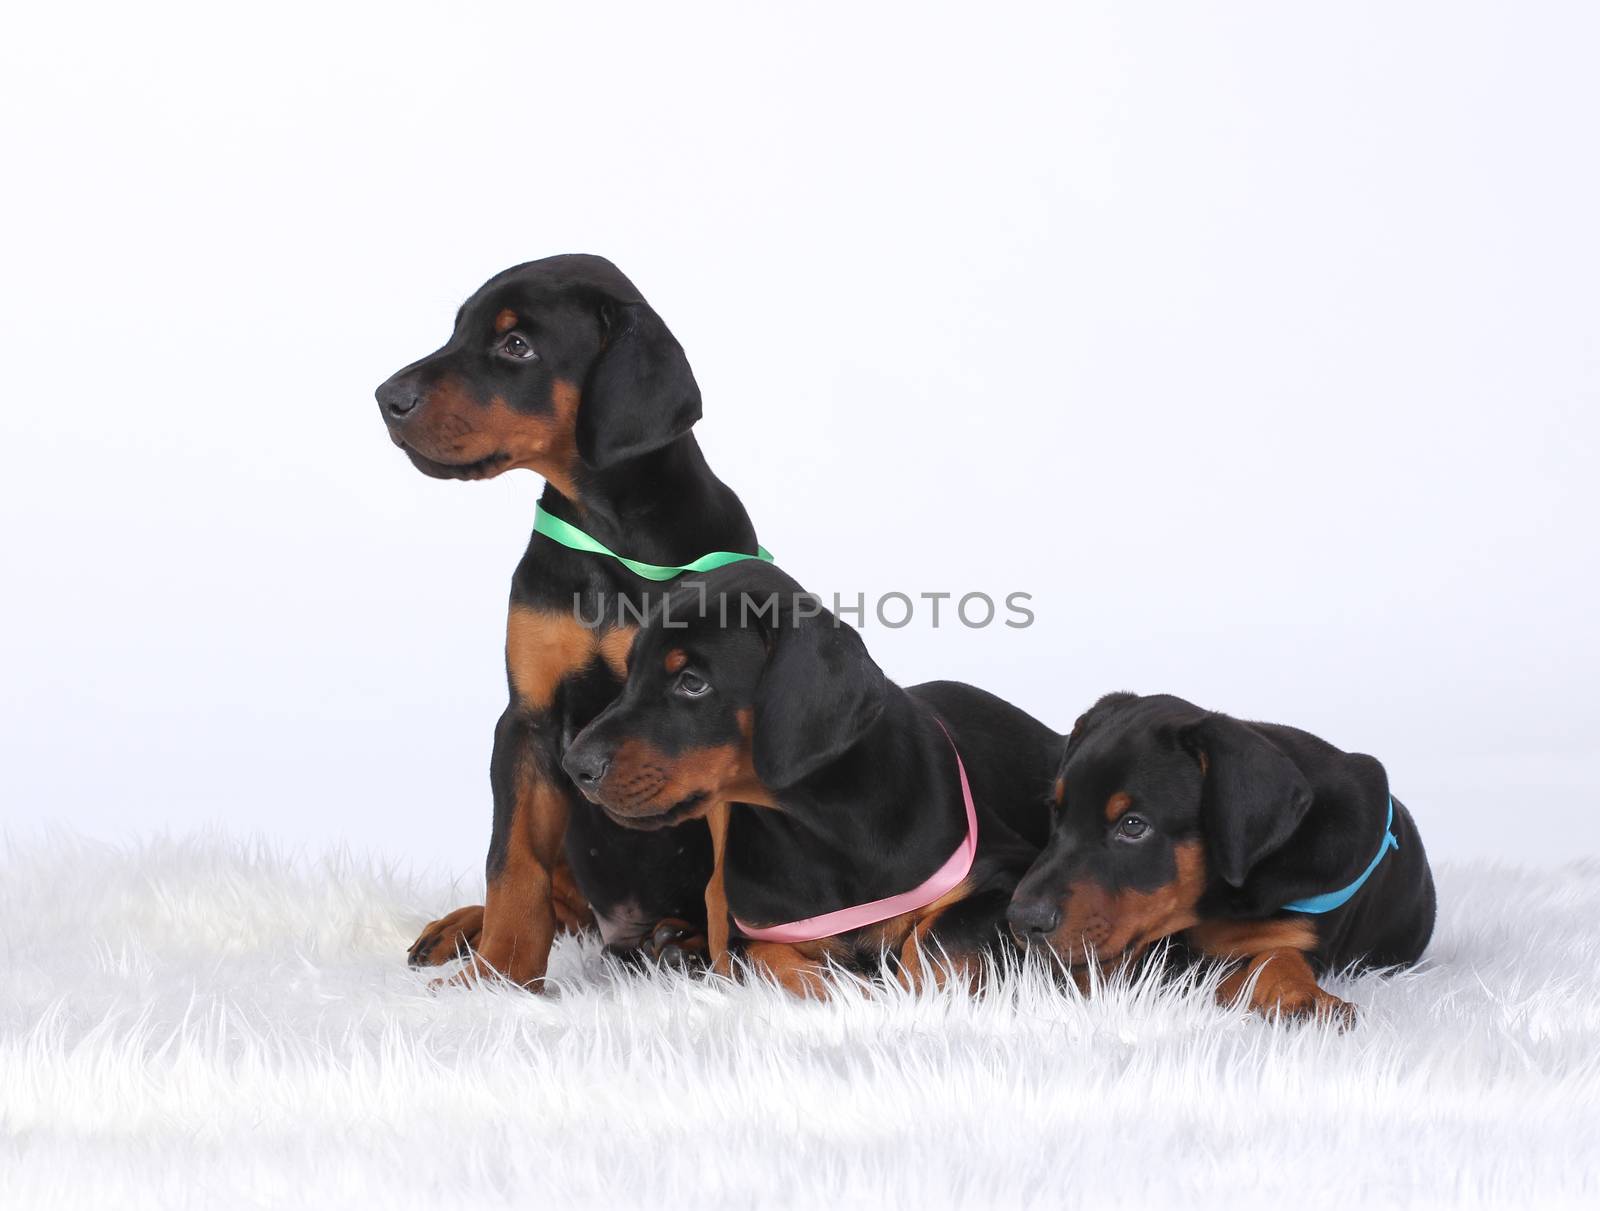 Group of dobermann puppies on white background